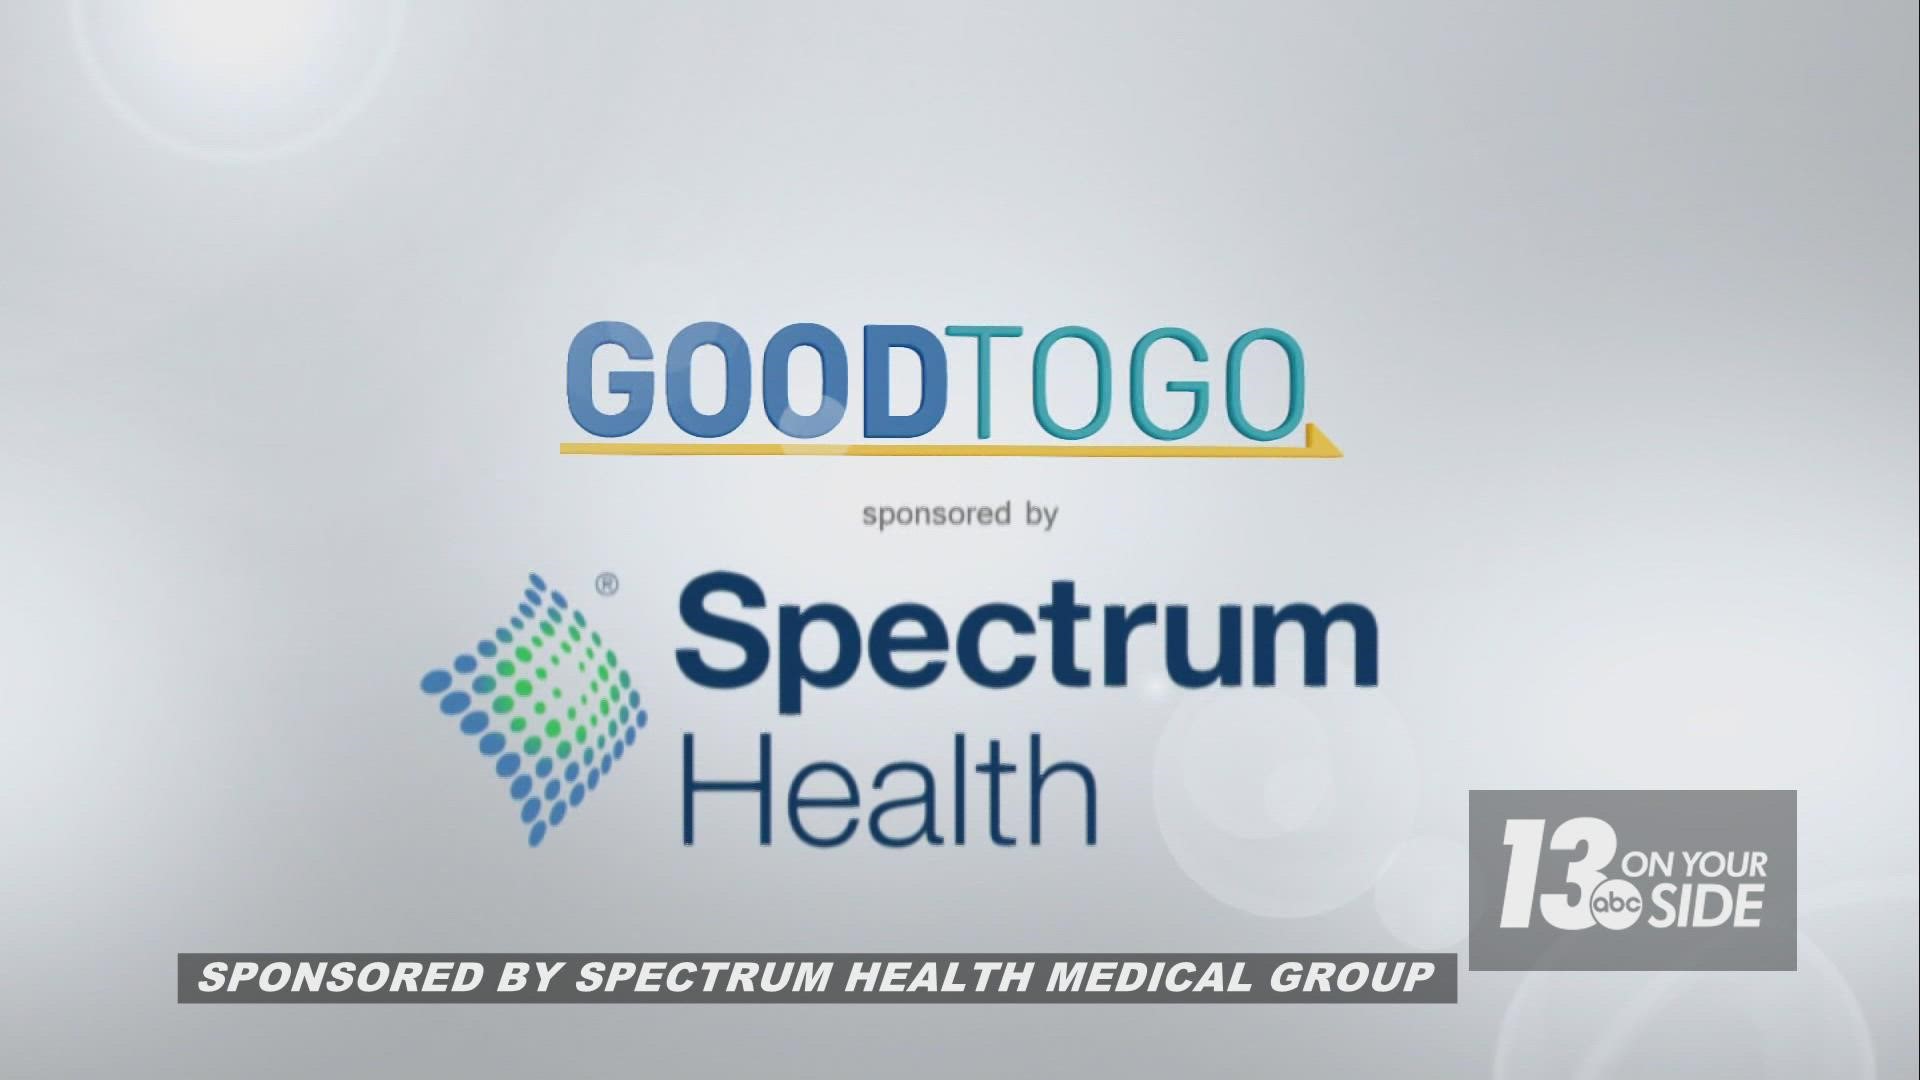 Locally governed and headquartered in Grand Rapids, Michigan, Spectrum Health is focused on the mission of improving health, inspiring hope and saving lives.